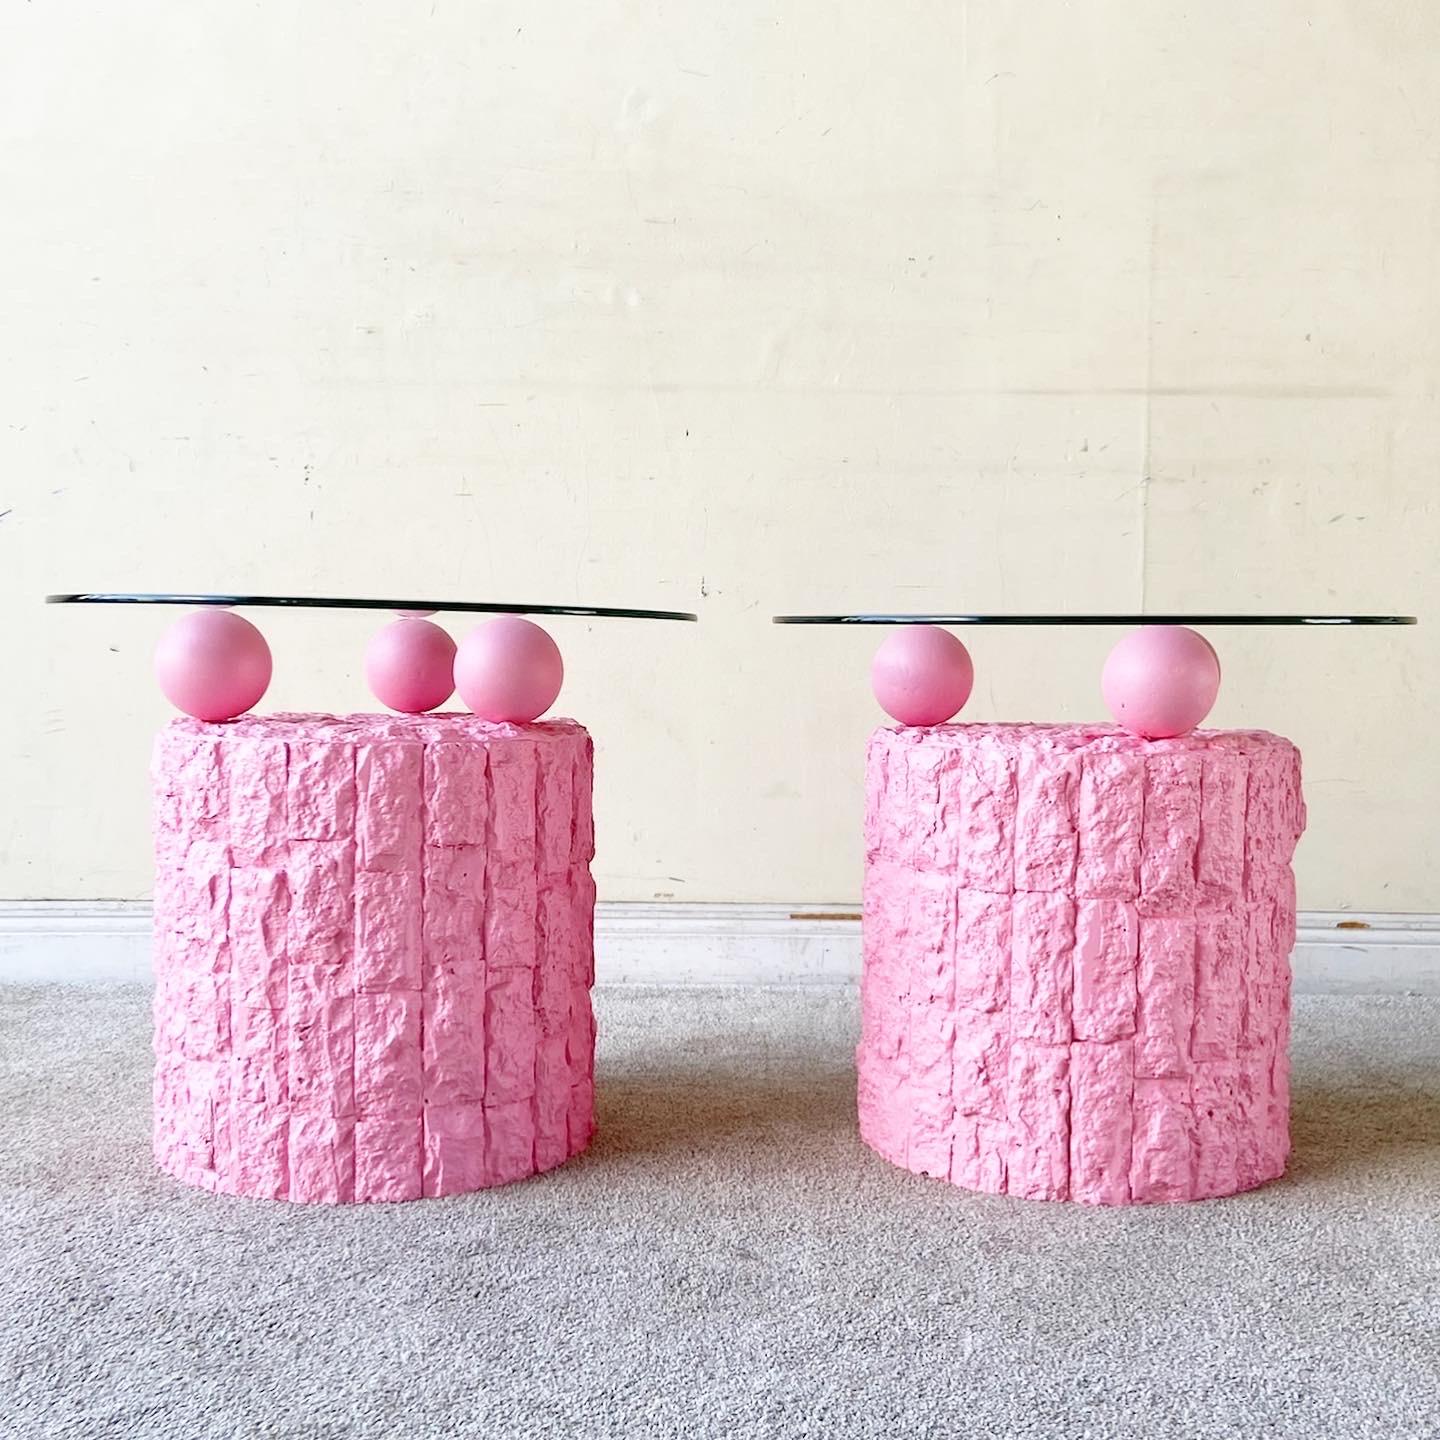 Outstanding pair of postmodern tessellated stone side tables. Each feature a painted hot pink finish with circular beveled glass tops.
